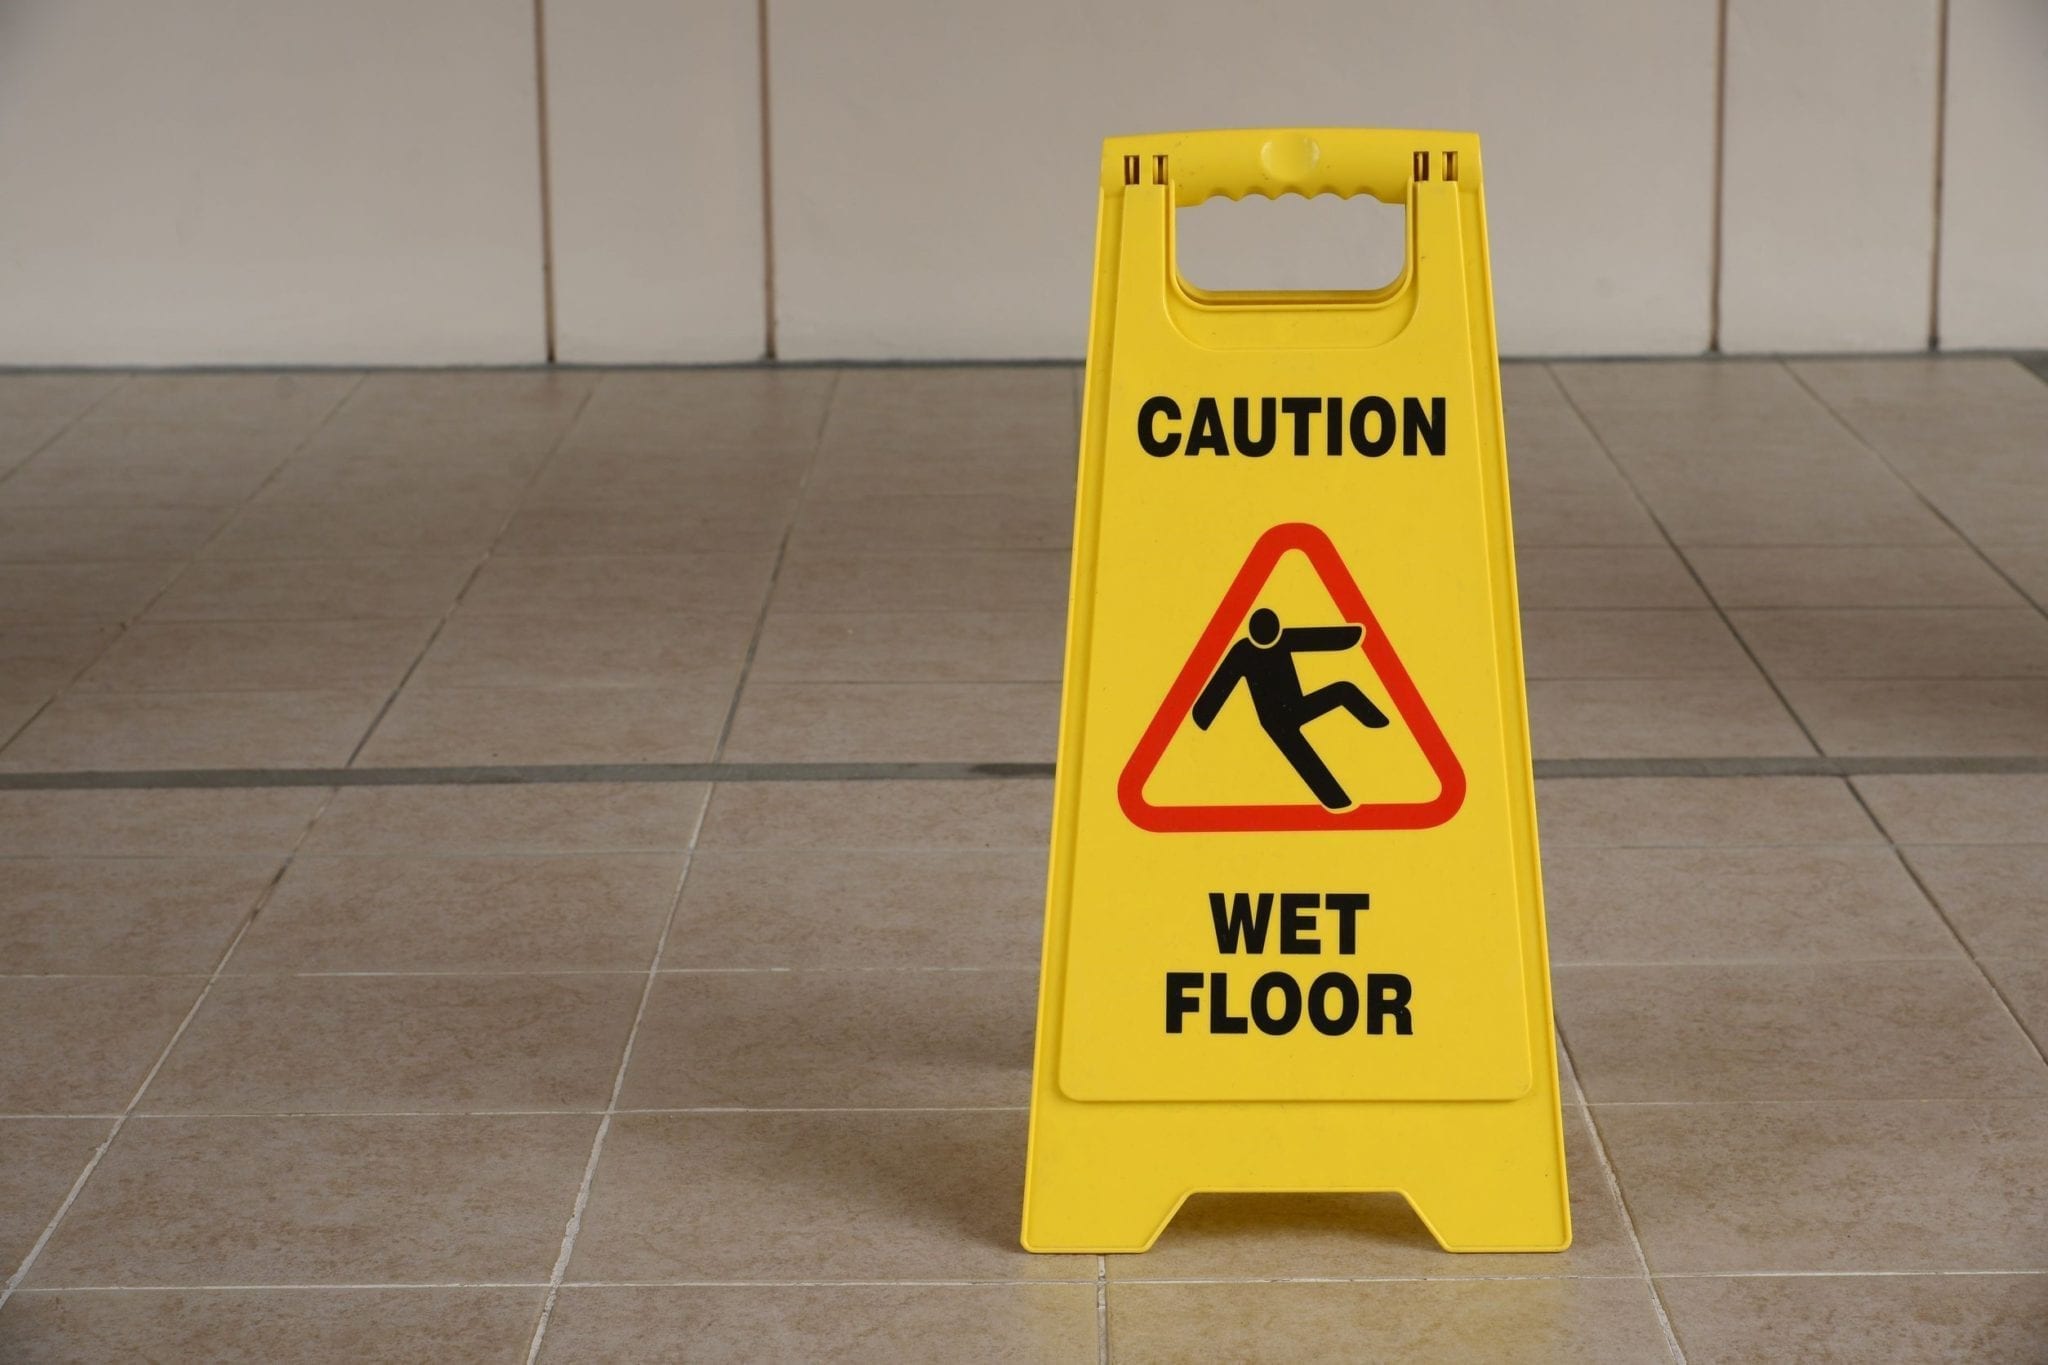 What Slip-Resistant Floors Could Mean for Florida Slip and Fall Cases